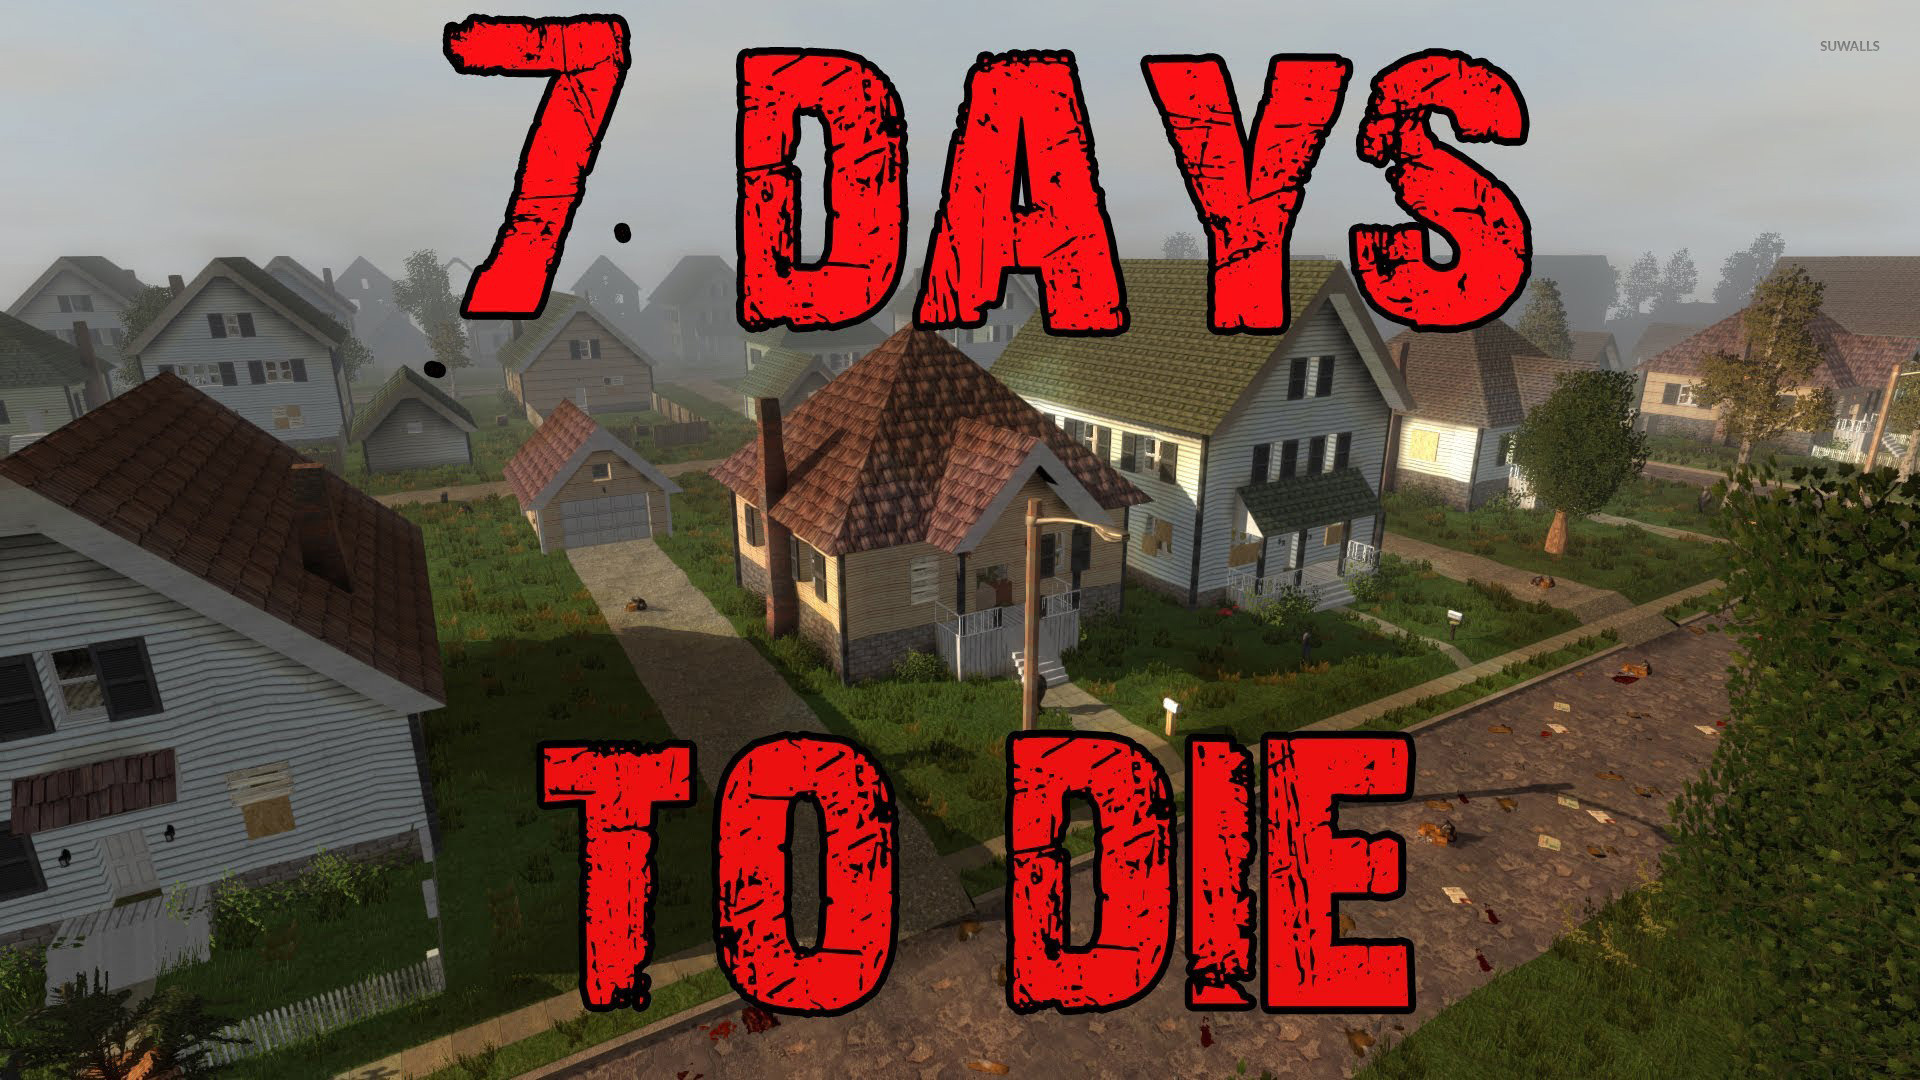 7 Days to Die Wallpaper (95+ images)